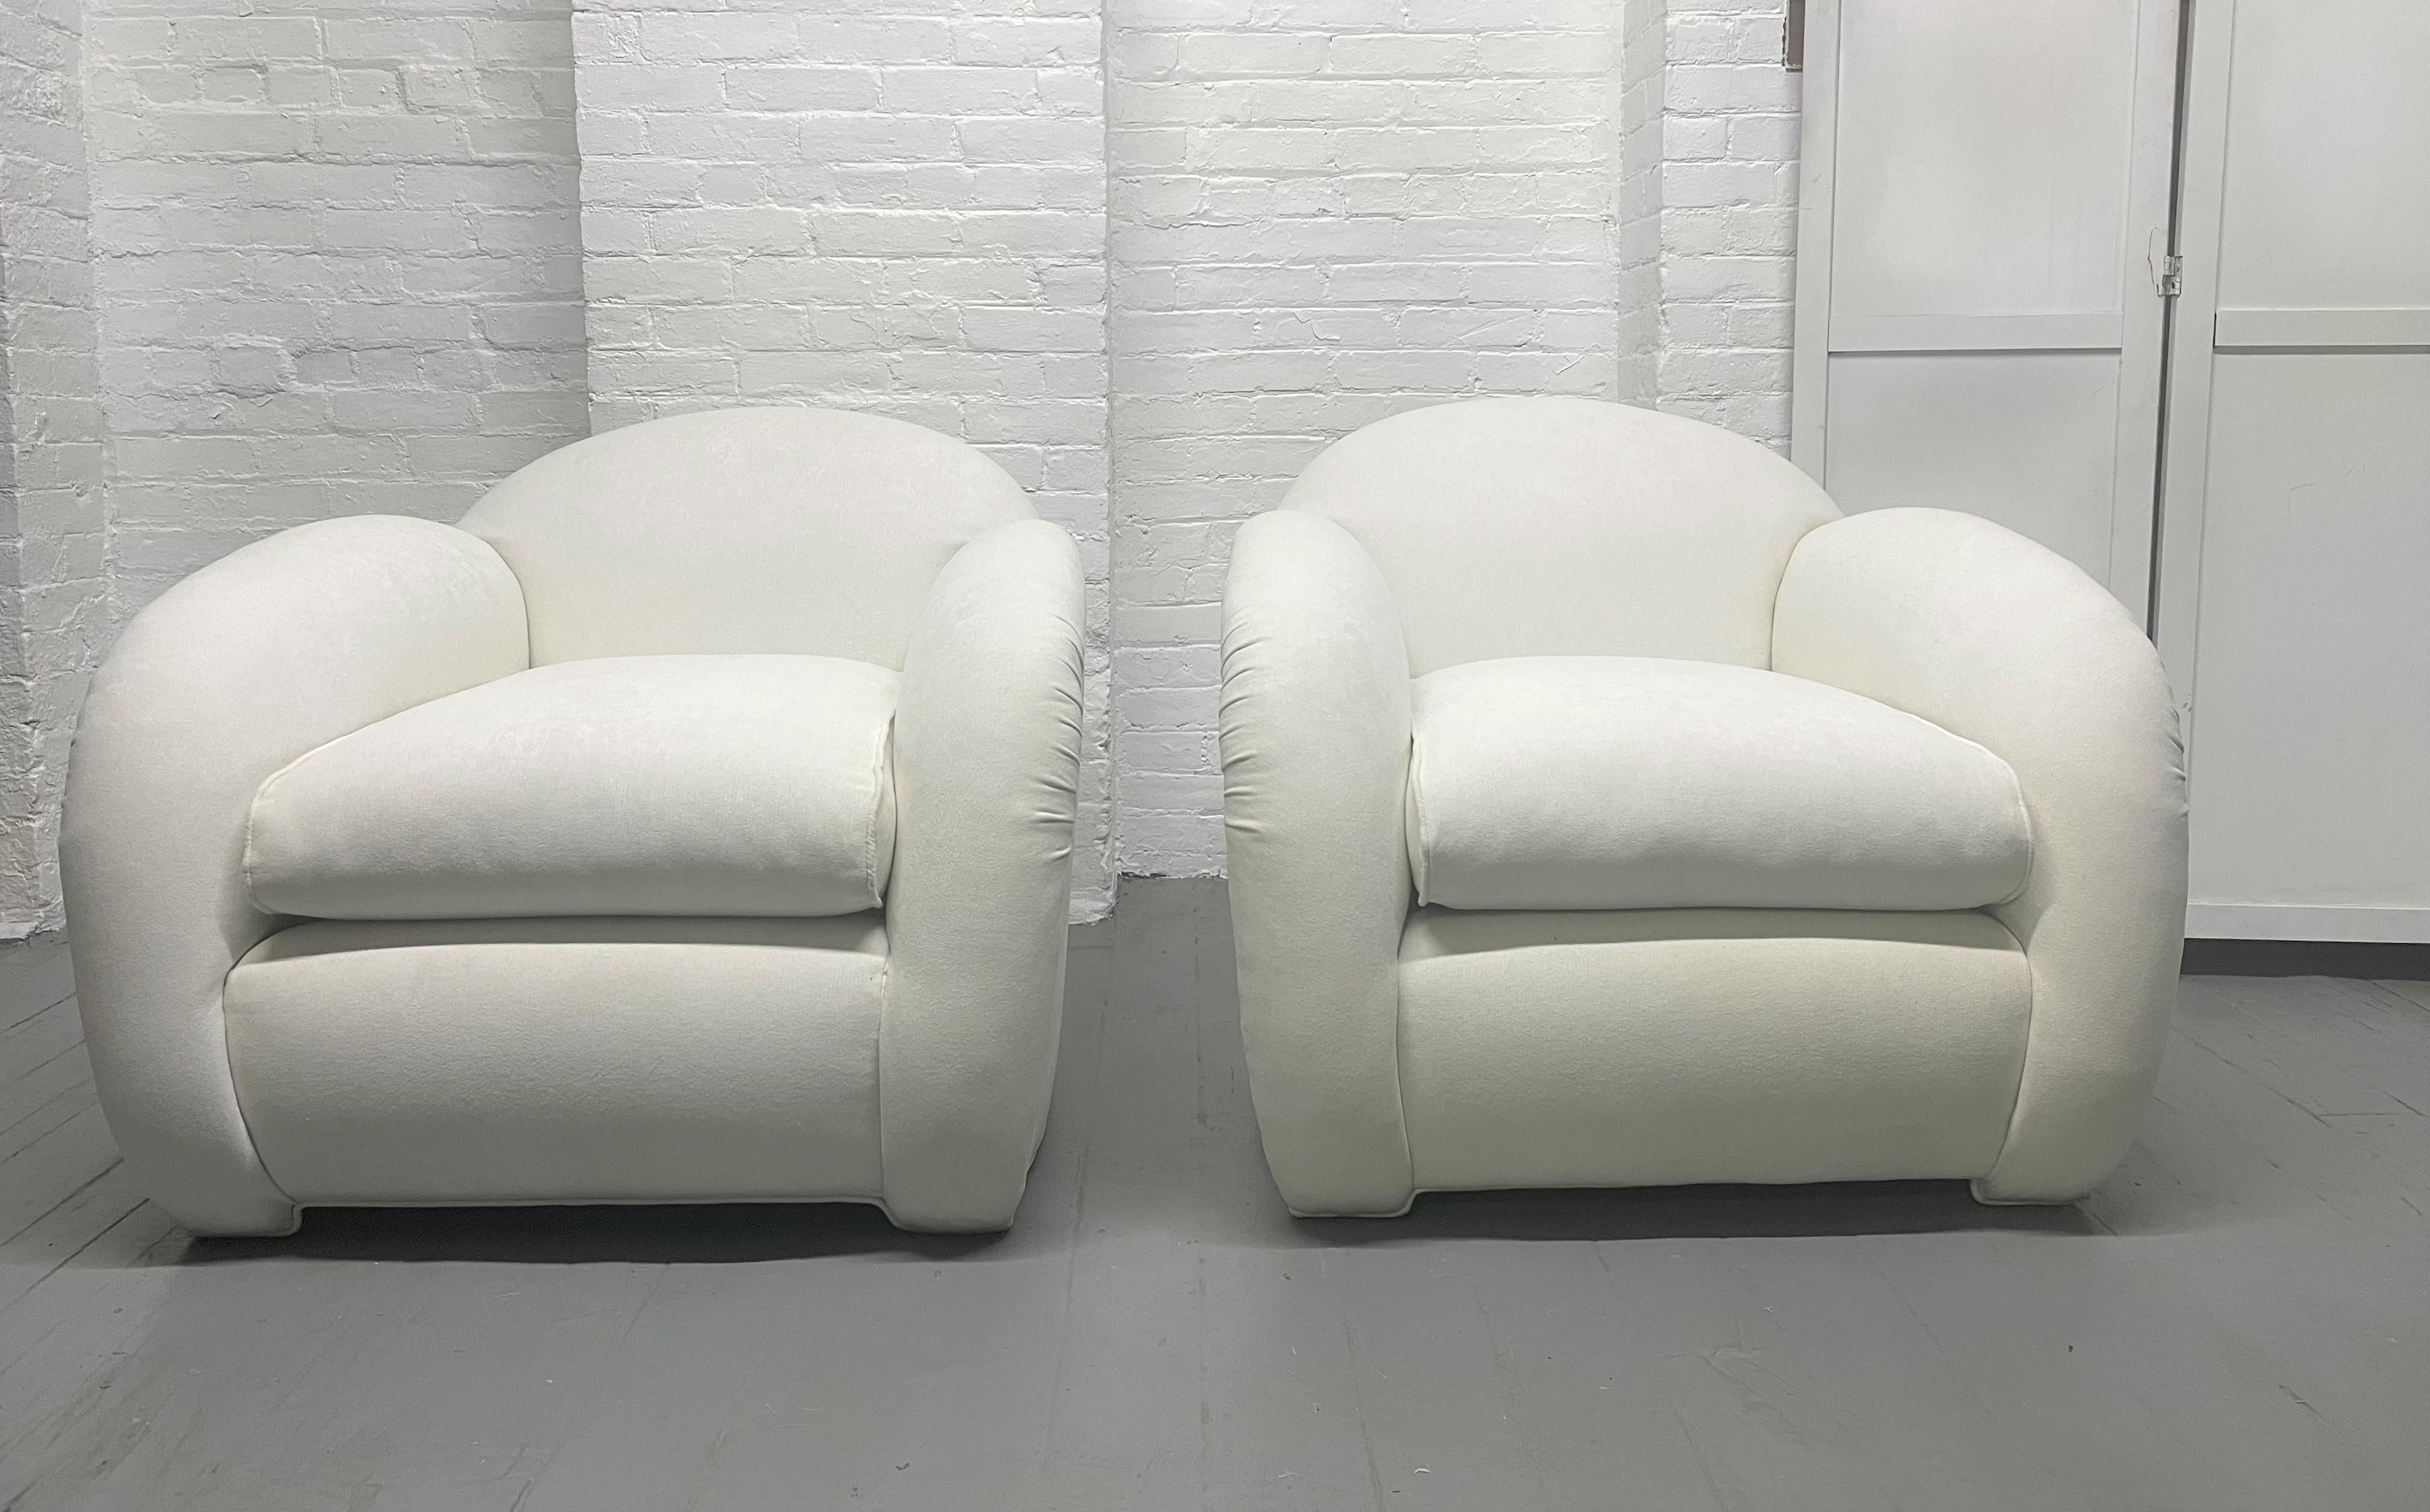 Pair of Art Deco upholstered lounge chairs with a matching ottoman. Cloud chairs. Ottoman measures: 29W x 20D x 17.5H.